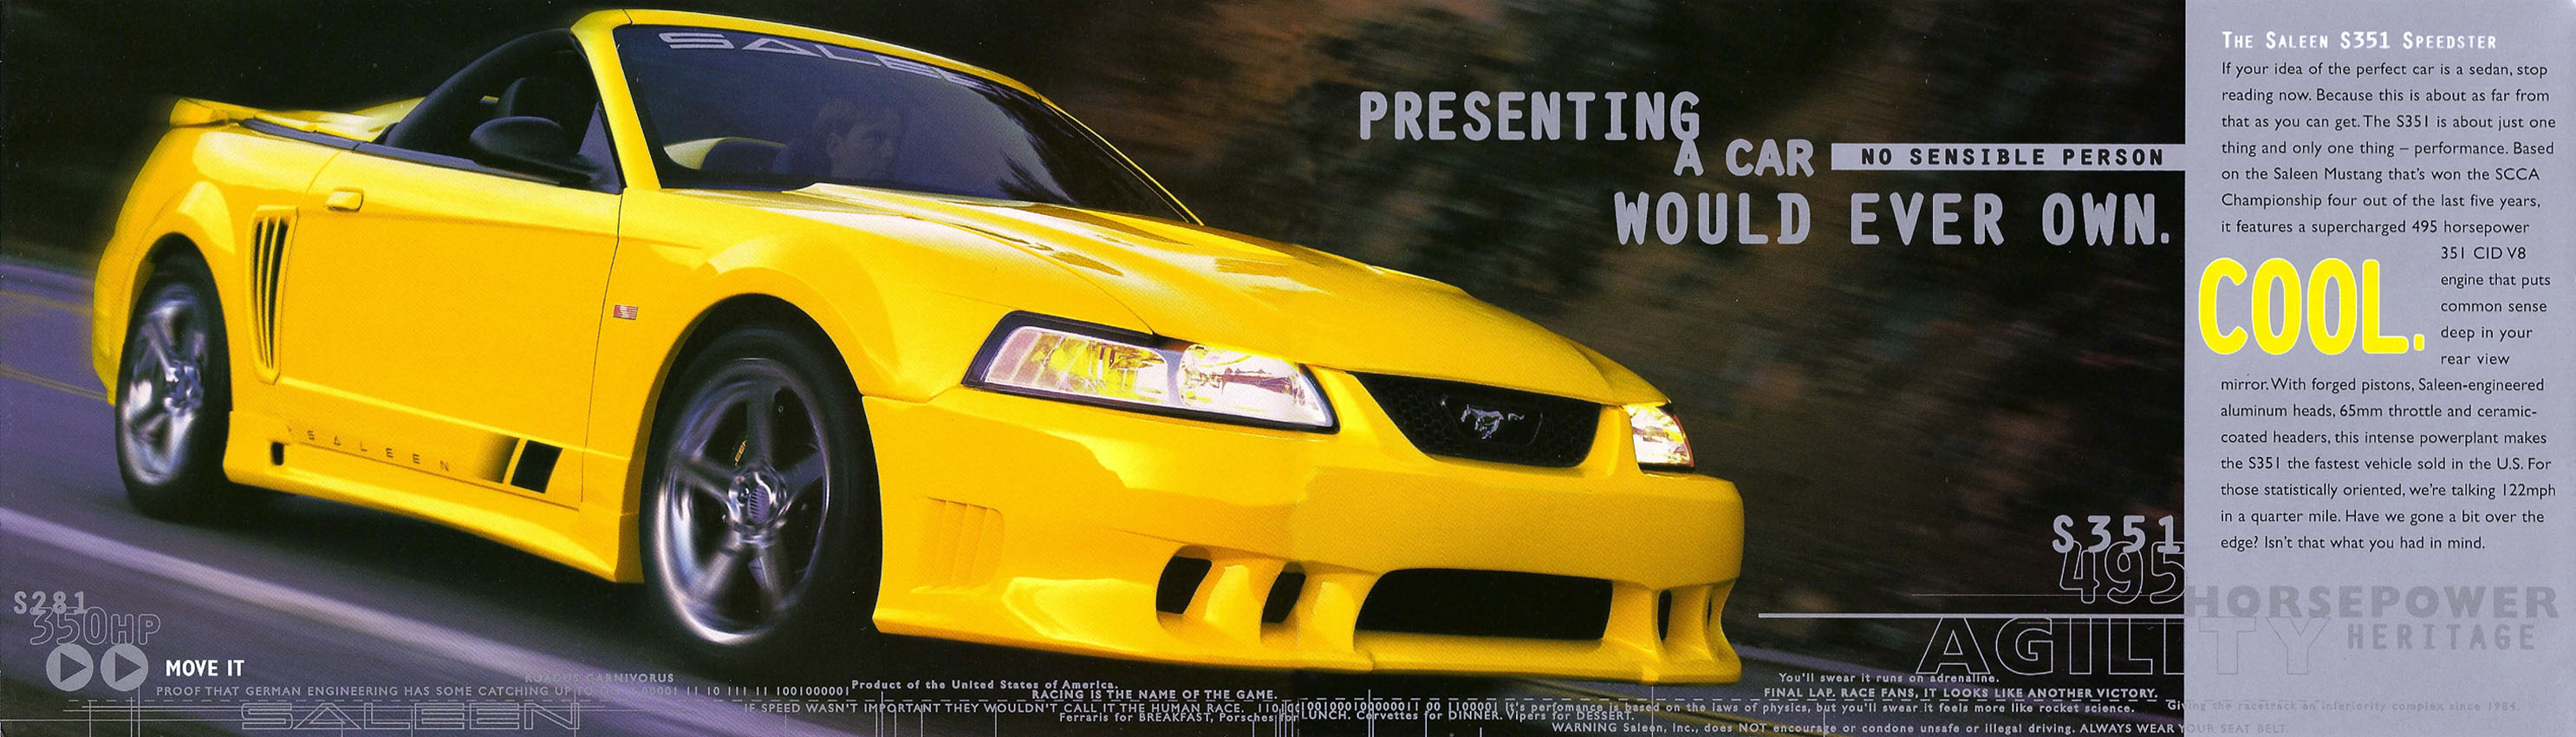 1999_Ford_Mustang_Saleen-02-03